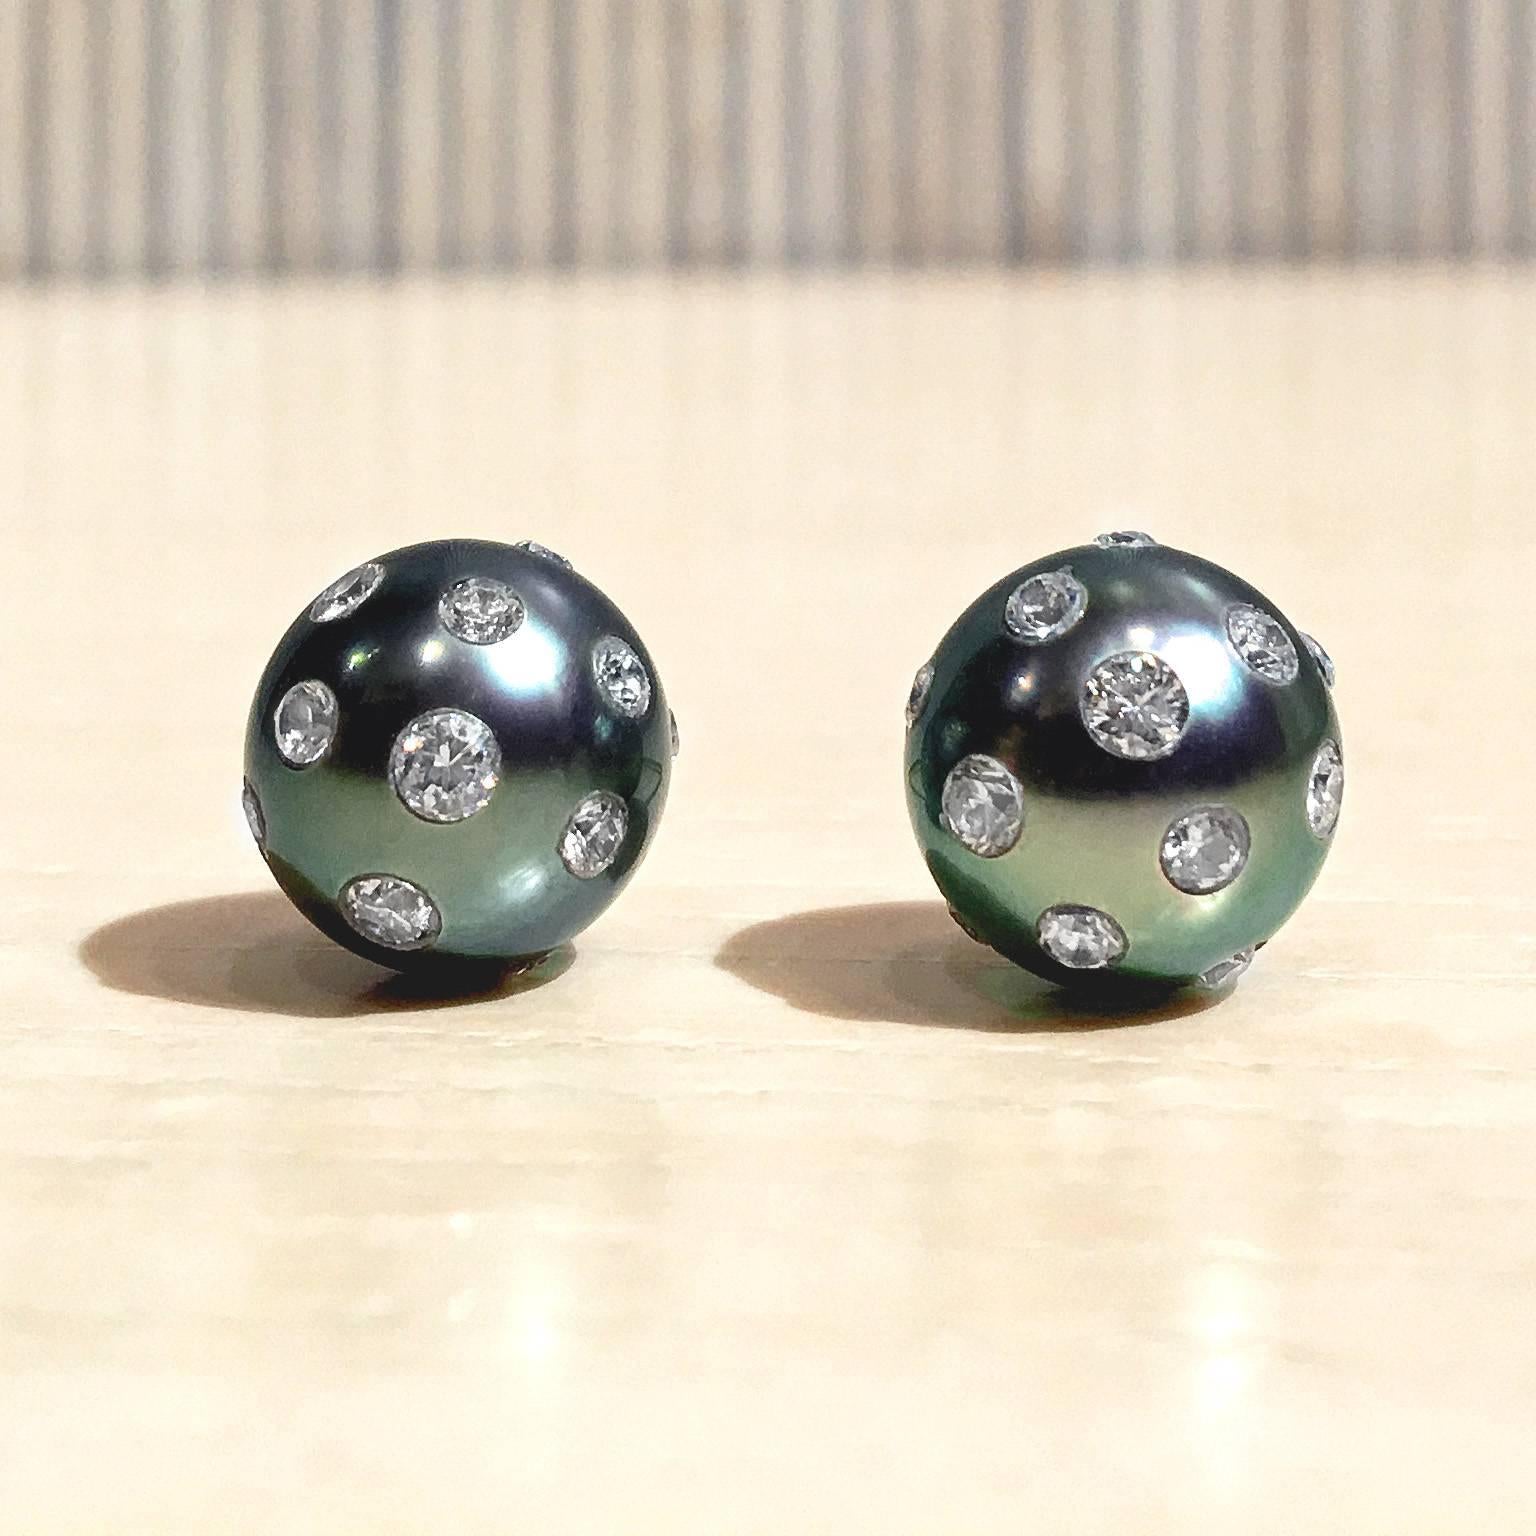 One of a Kind 10mm Lustrous Tahitian Pearl Earrings handcrafted by Russell Trusso with 0.77 total carats of embedded white round brilliant-cut diamonds and 18k yellow gold posts and backs. Stamped 750